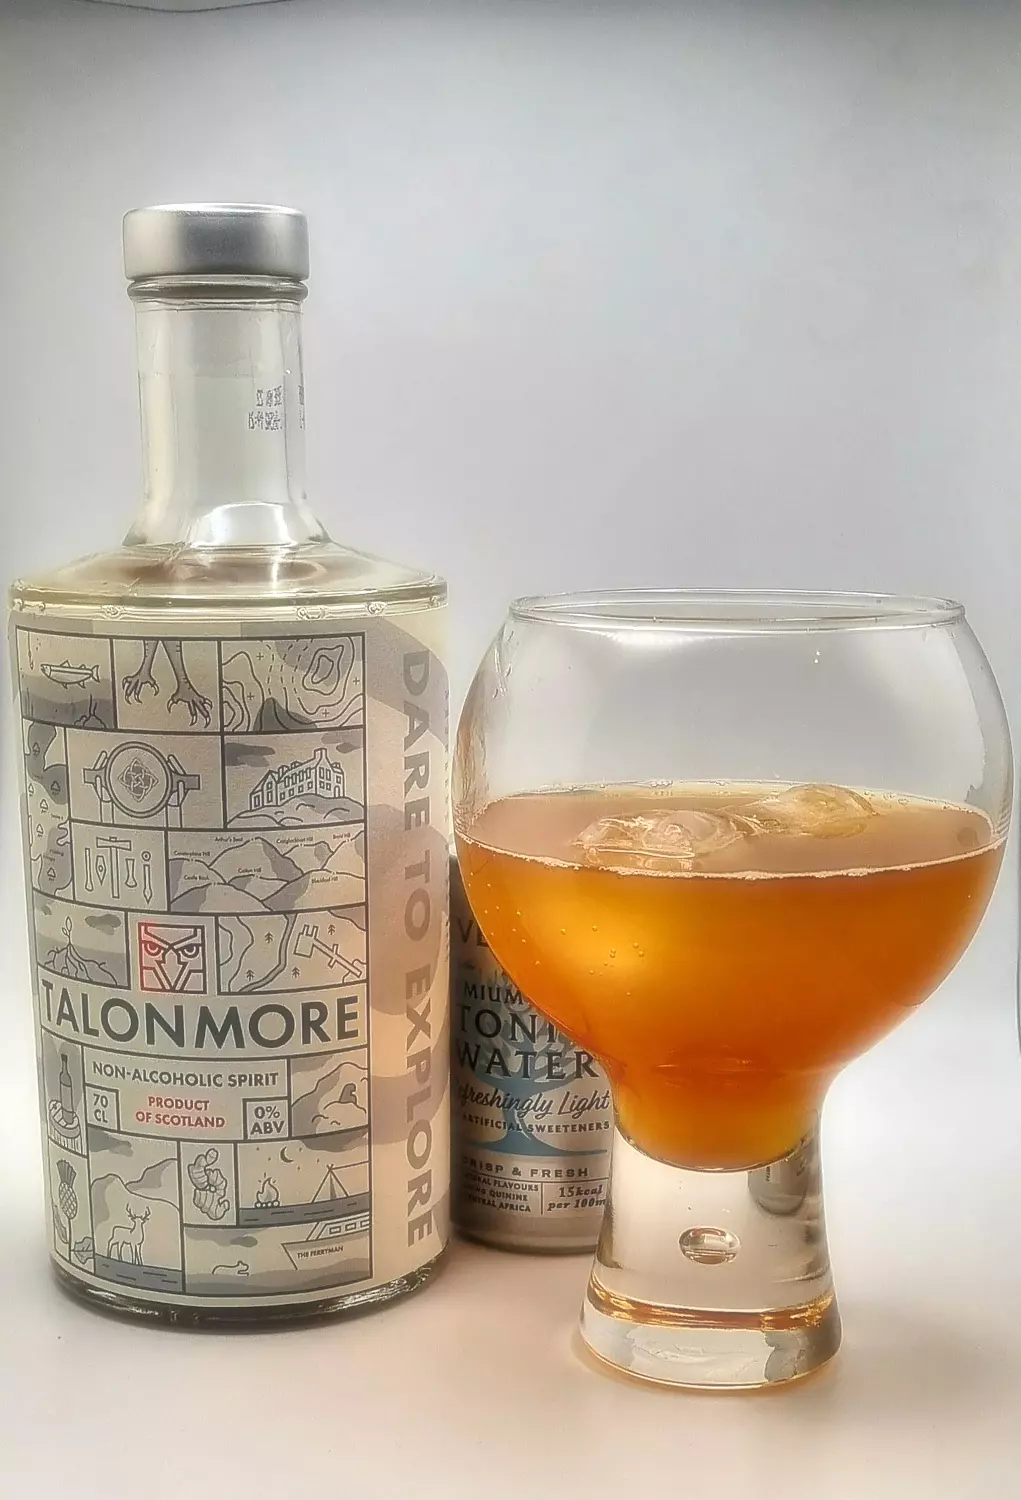 talonmore cocktail